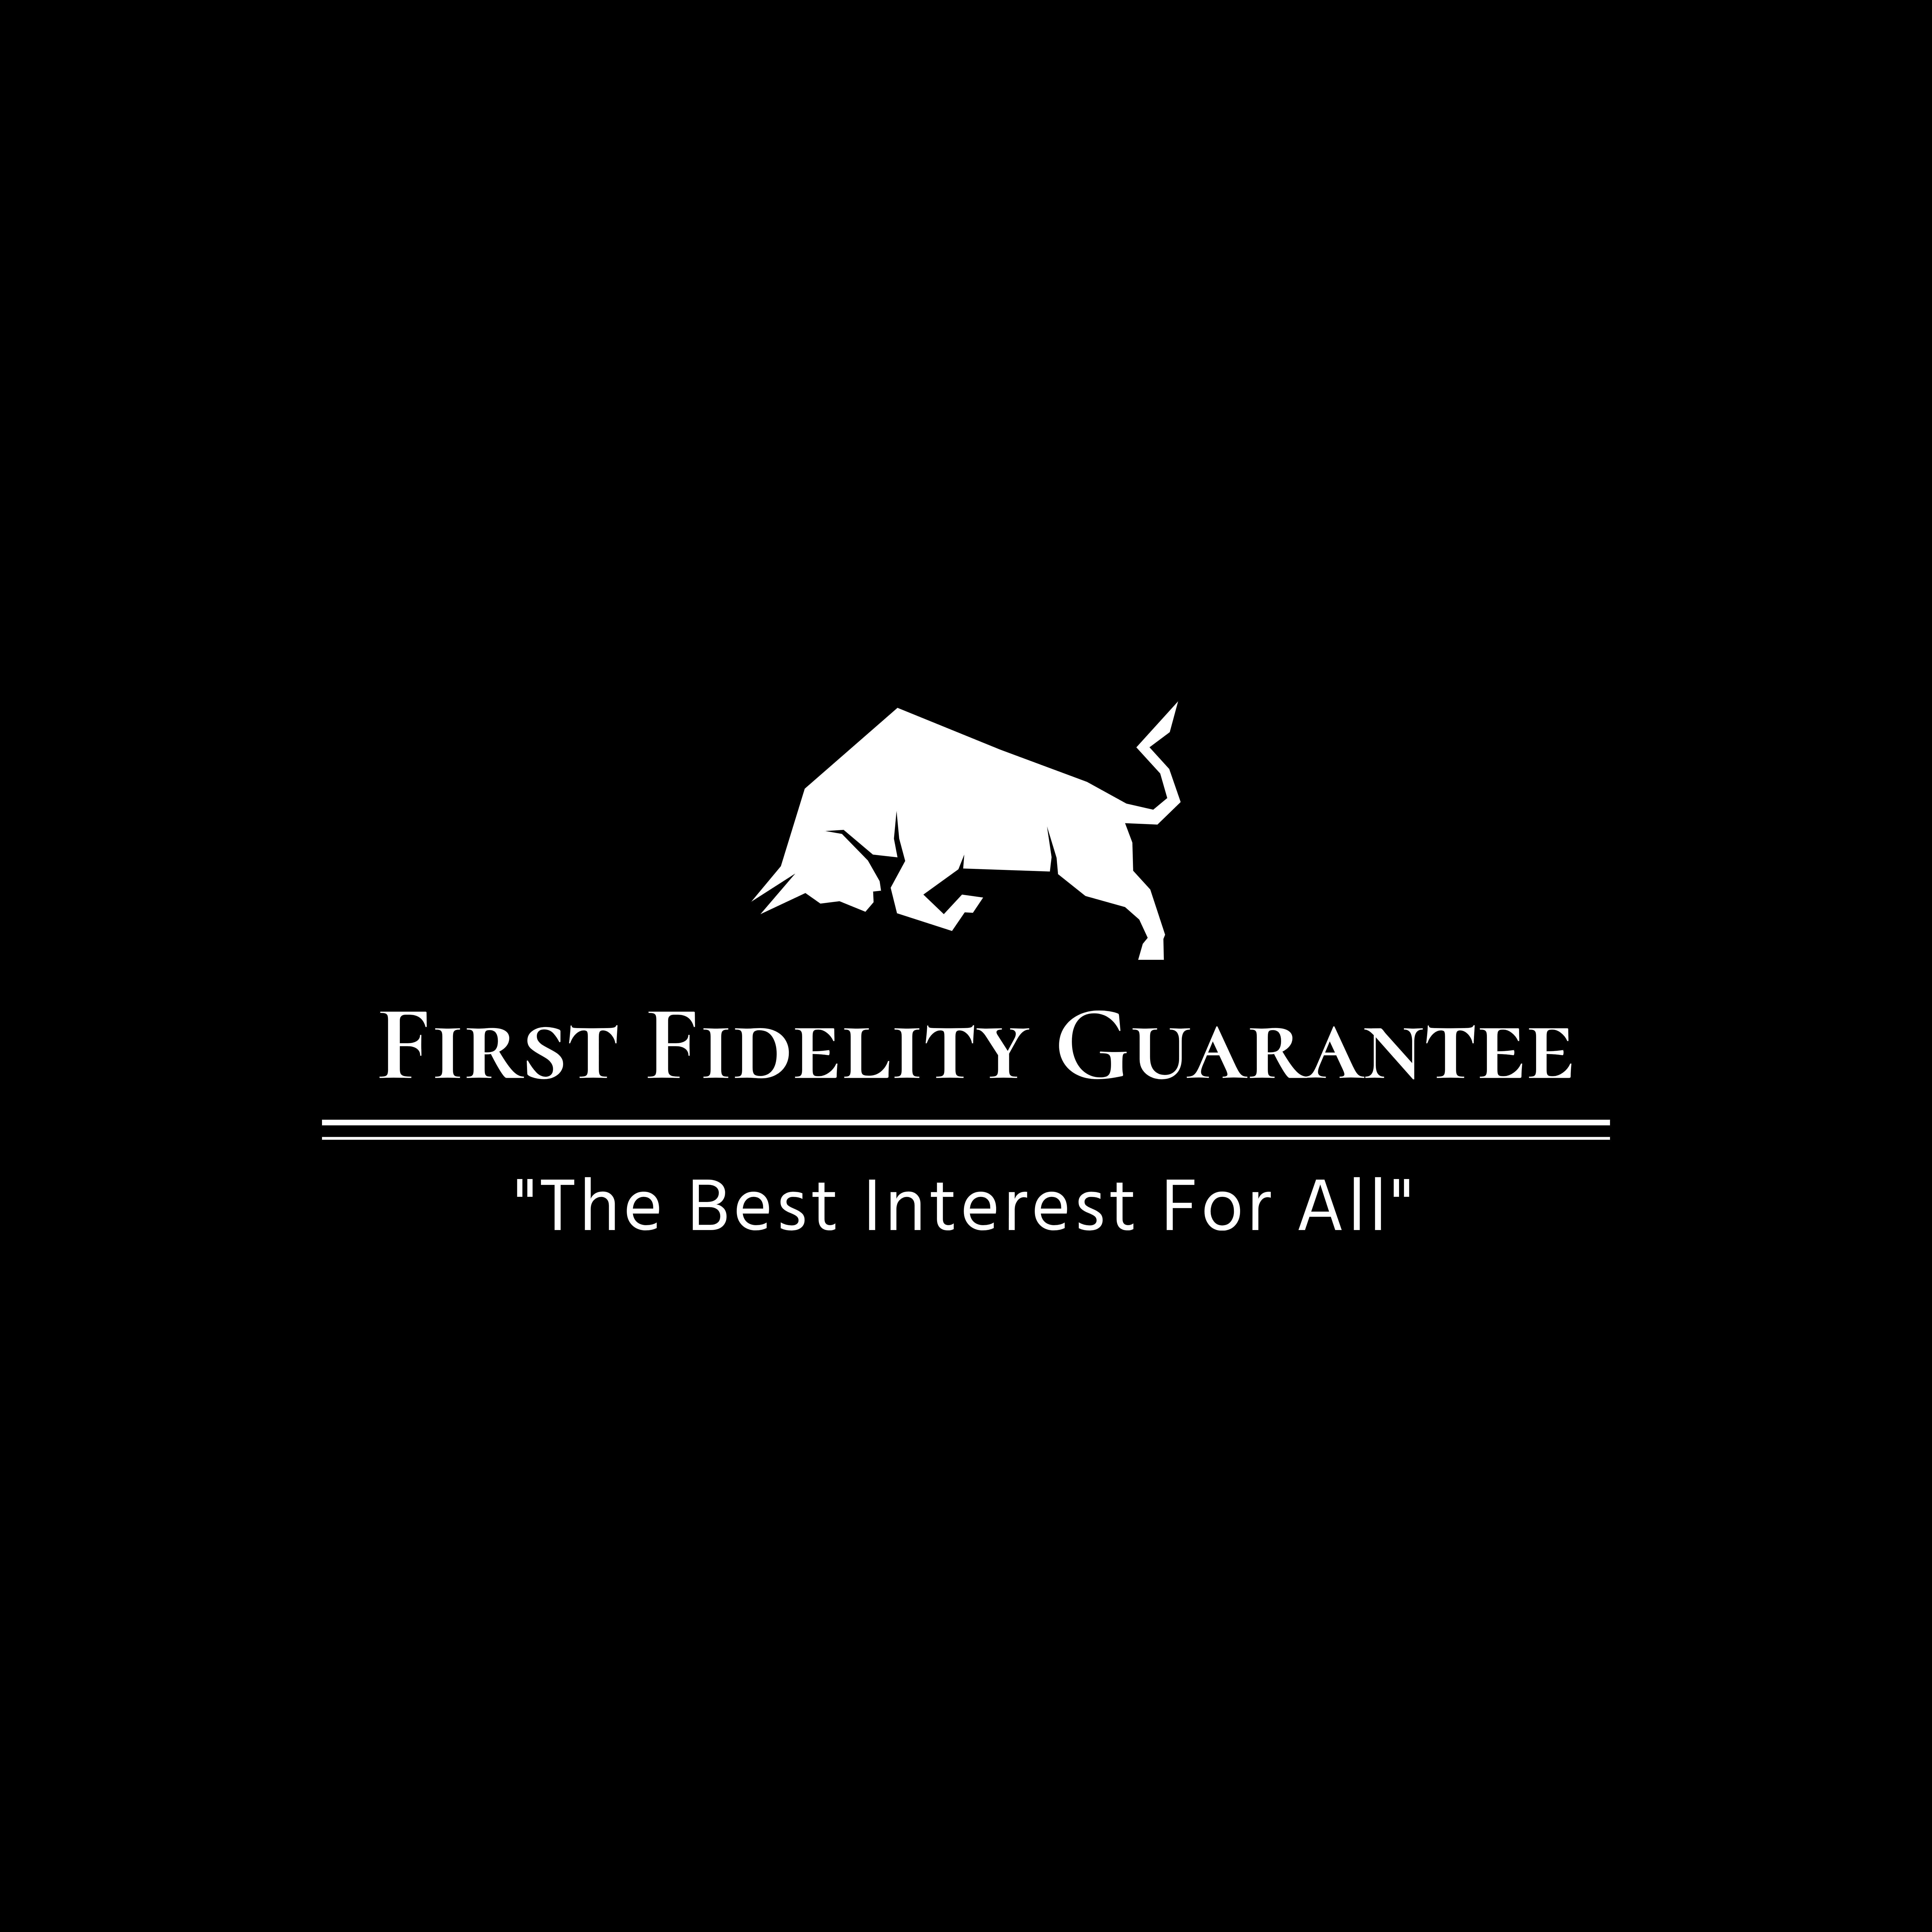 Introducing First Fidelity Guarantee, a Financial Services Firm Proficient in CD Brokerage, IRA and Money Market Accounts